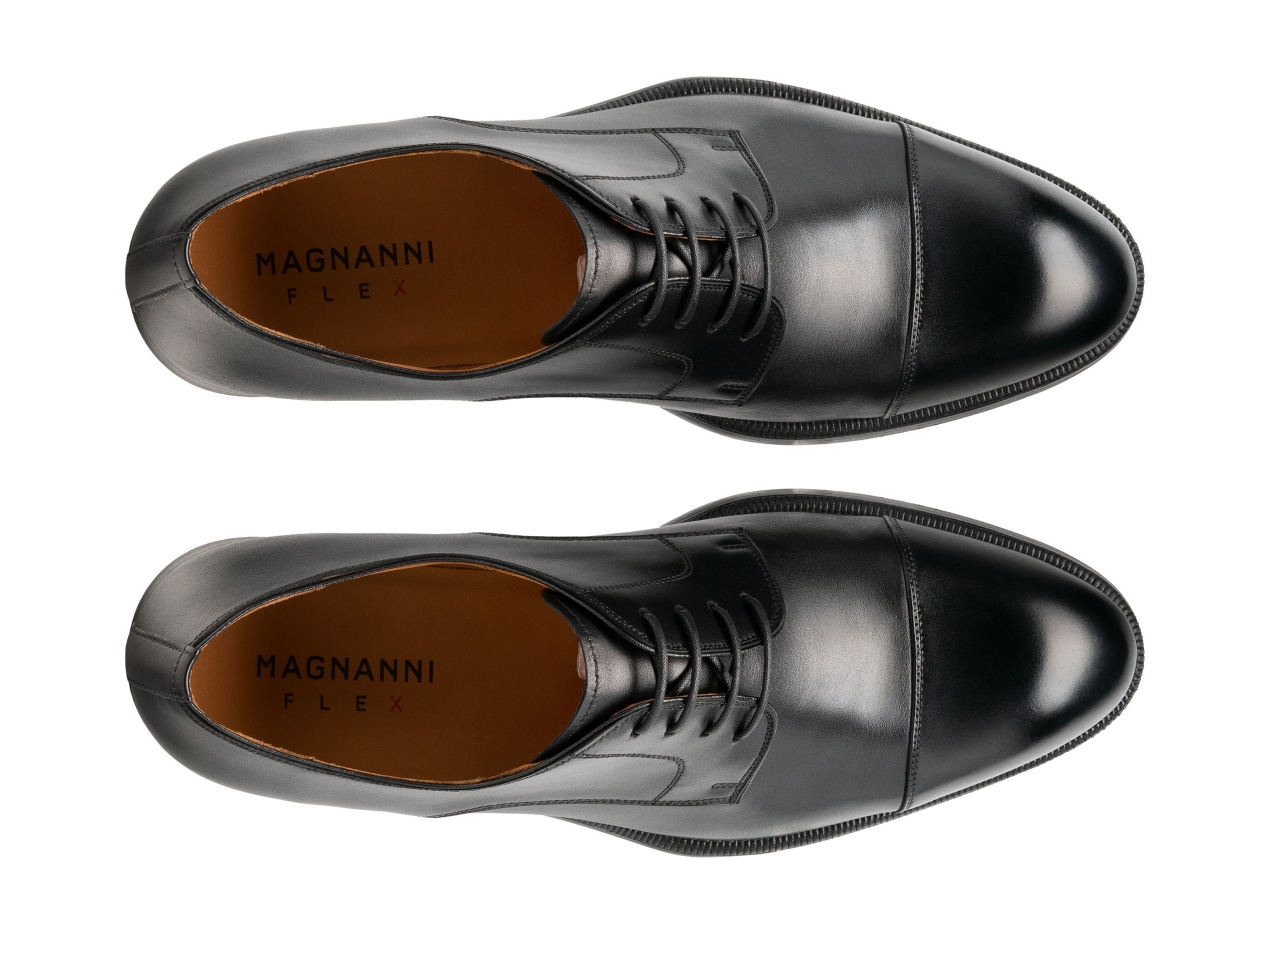 Wide Size Comfort: Magnanni Shoes in Wide Size